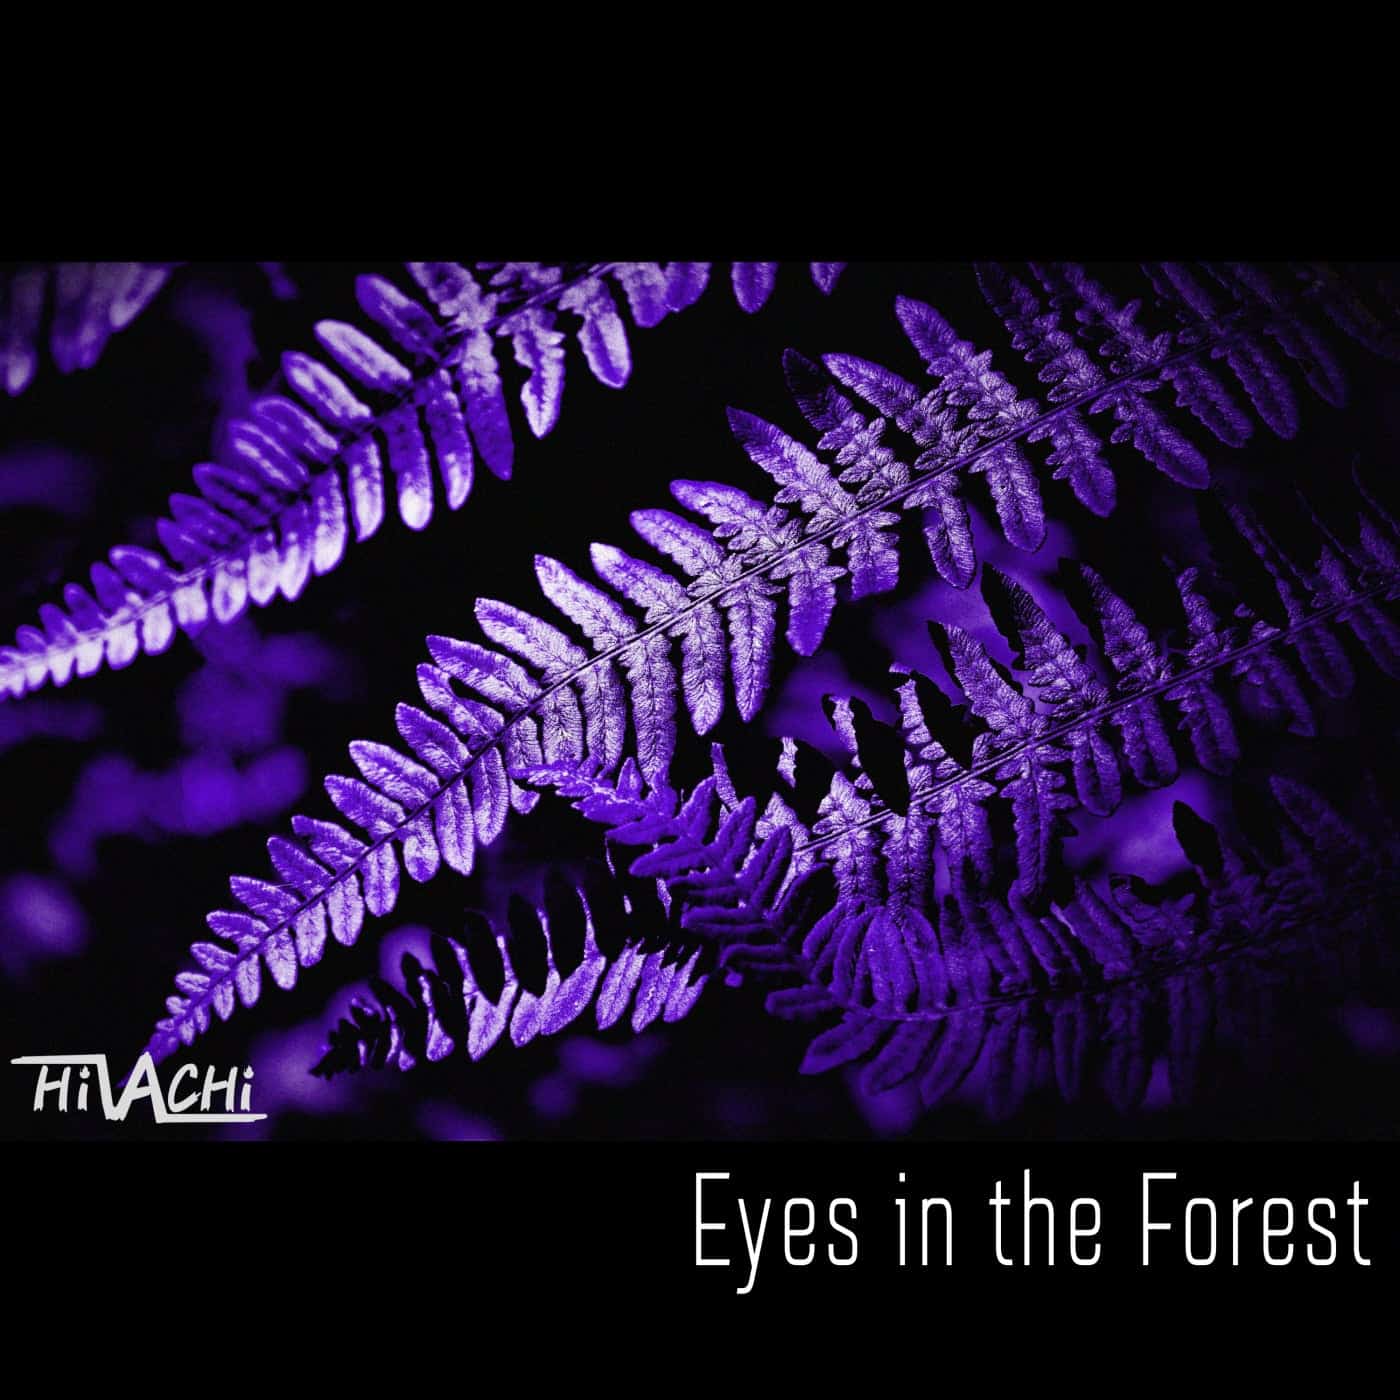 HiVACHi released “Eyes in the Forest” single